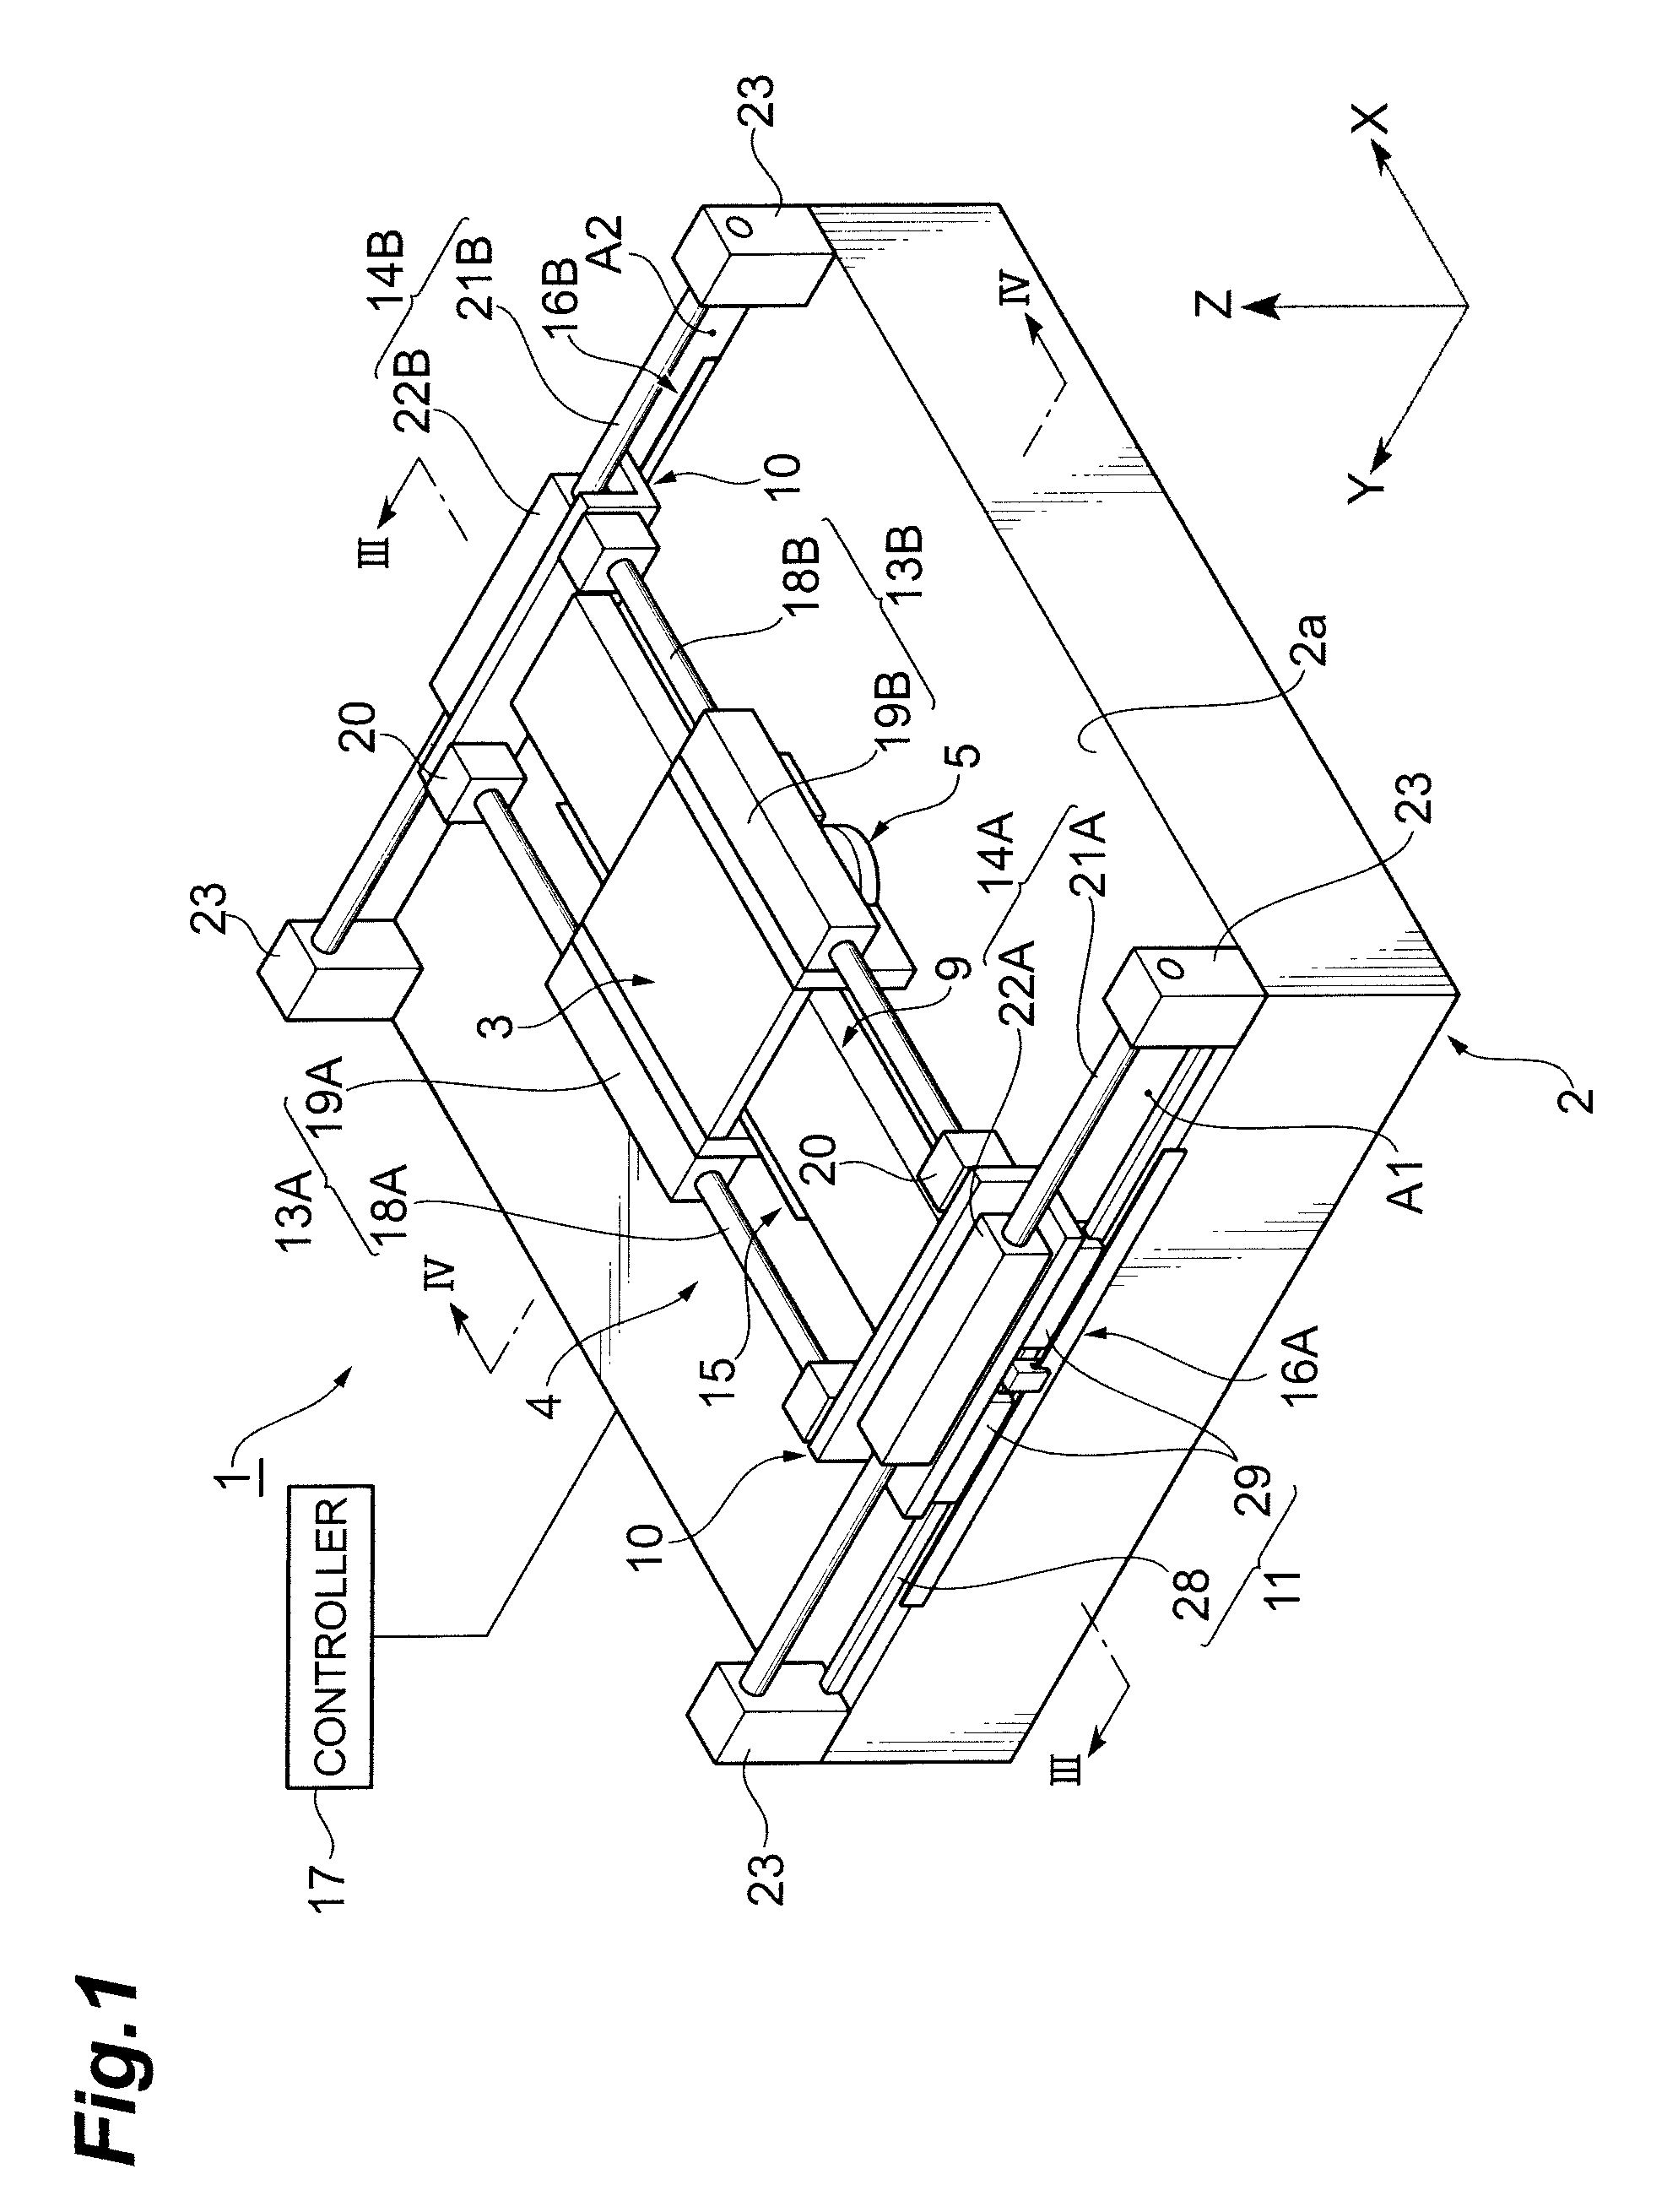 XY stage device, semiconductor inspection apparatus, and semiconductor exposure apparatus